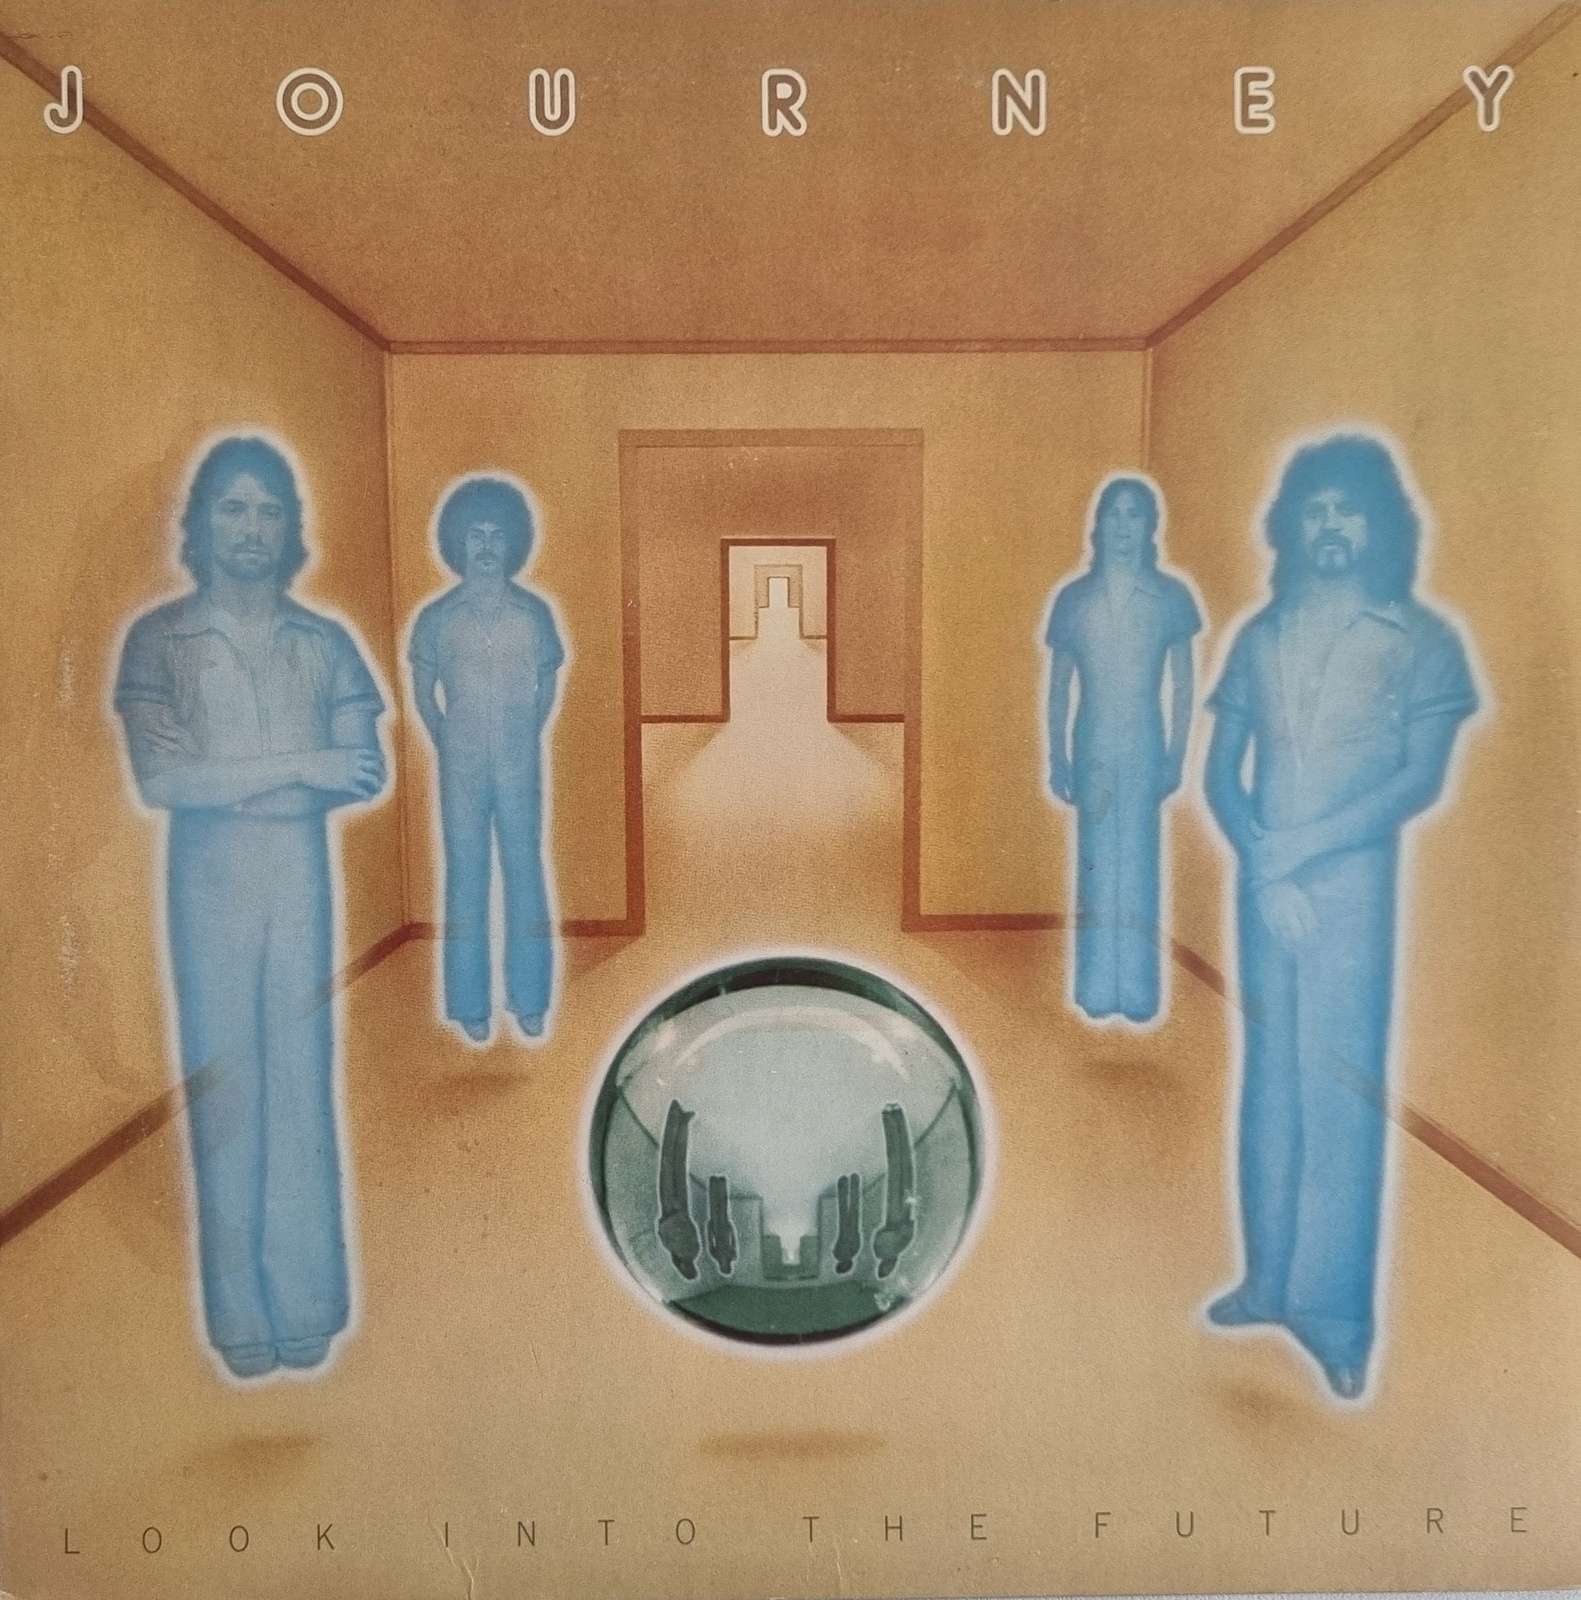 Journey - Looking into the Future (LP)